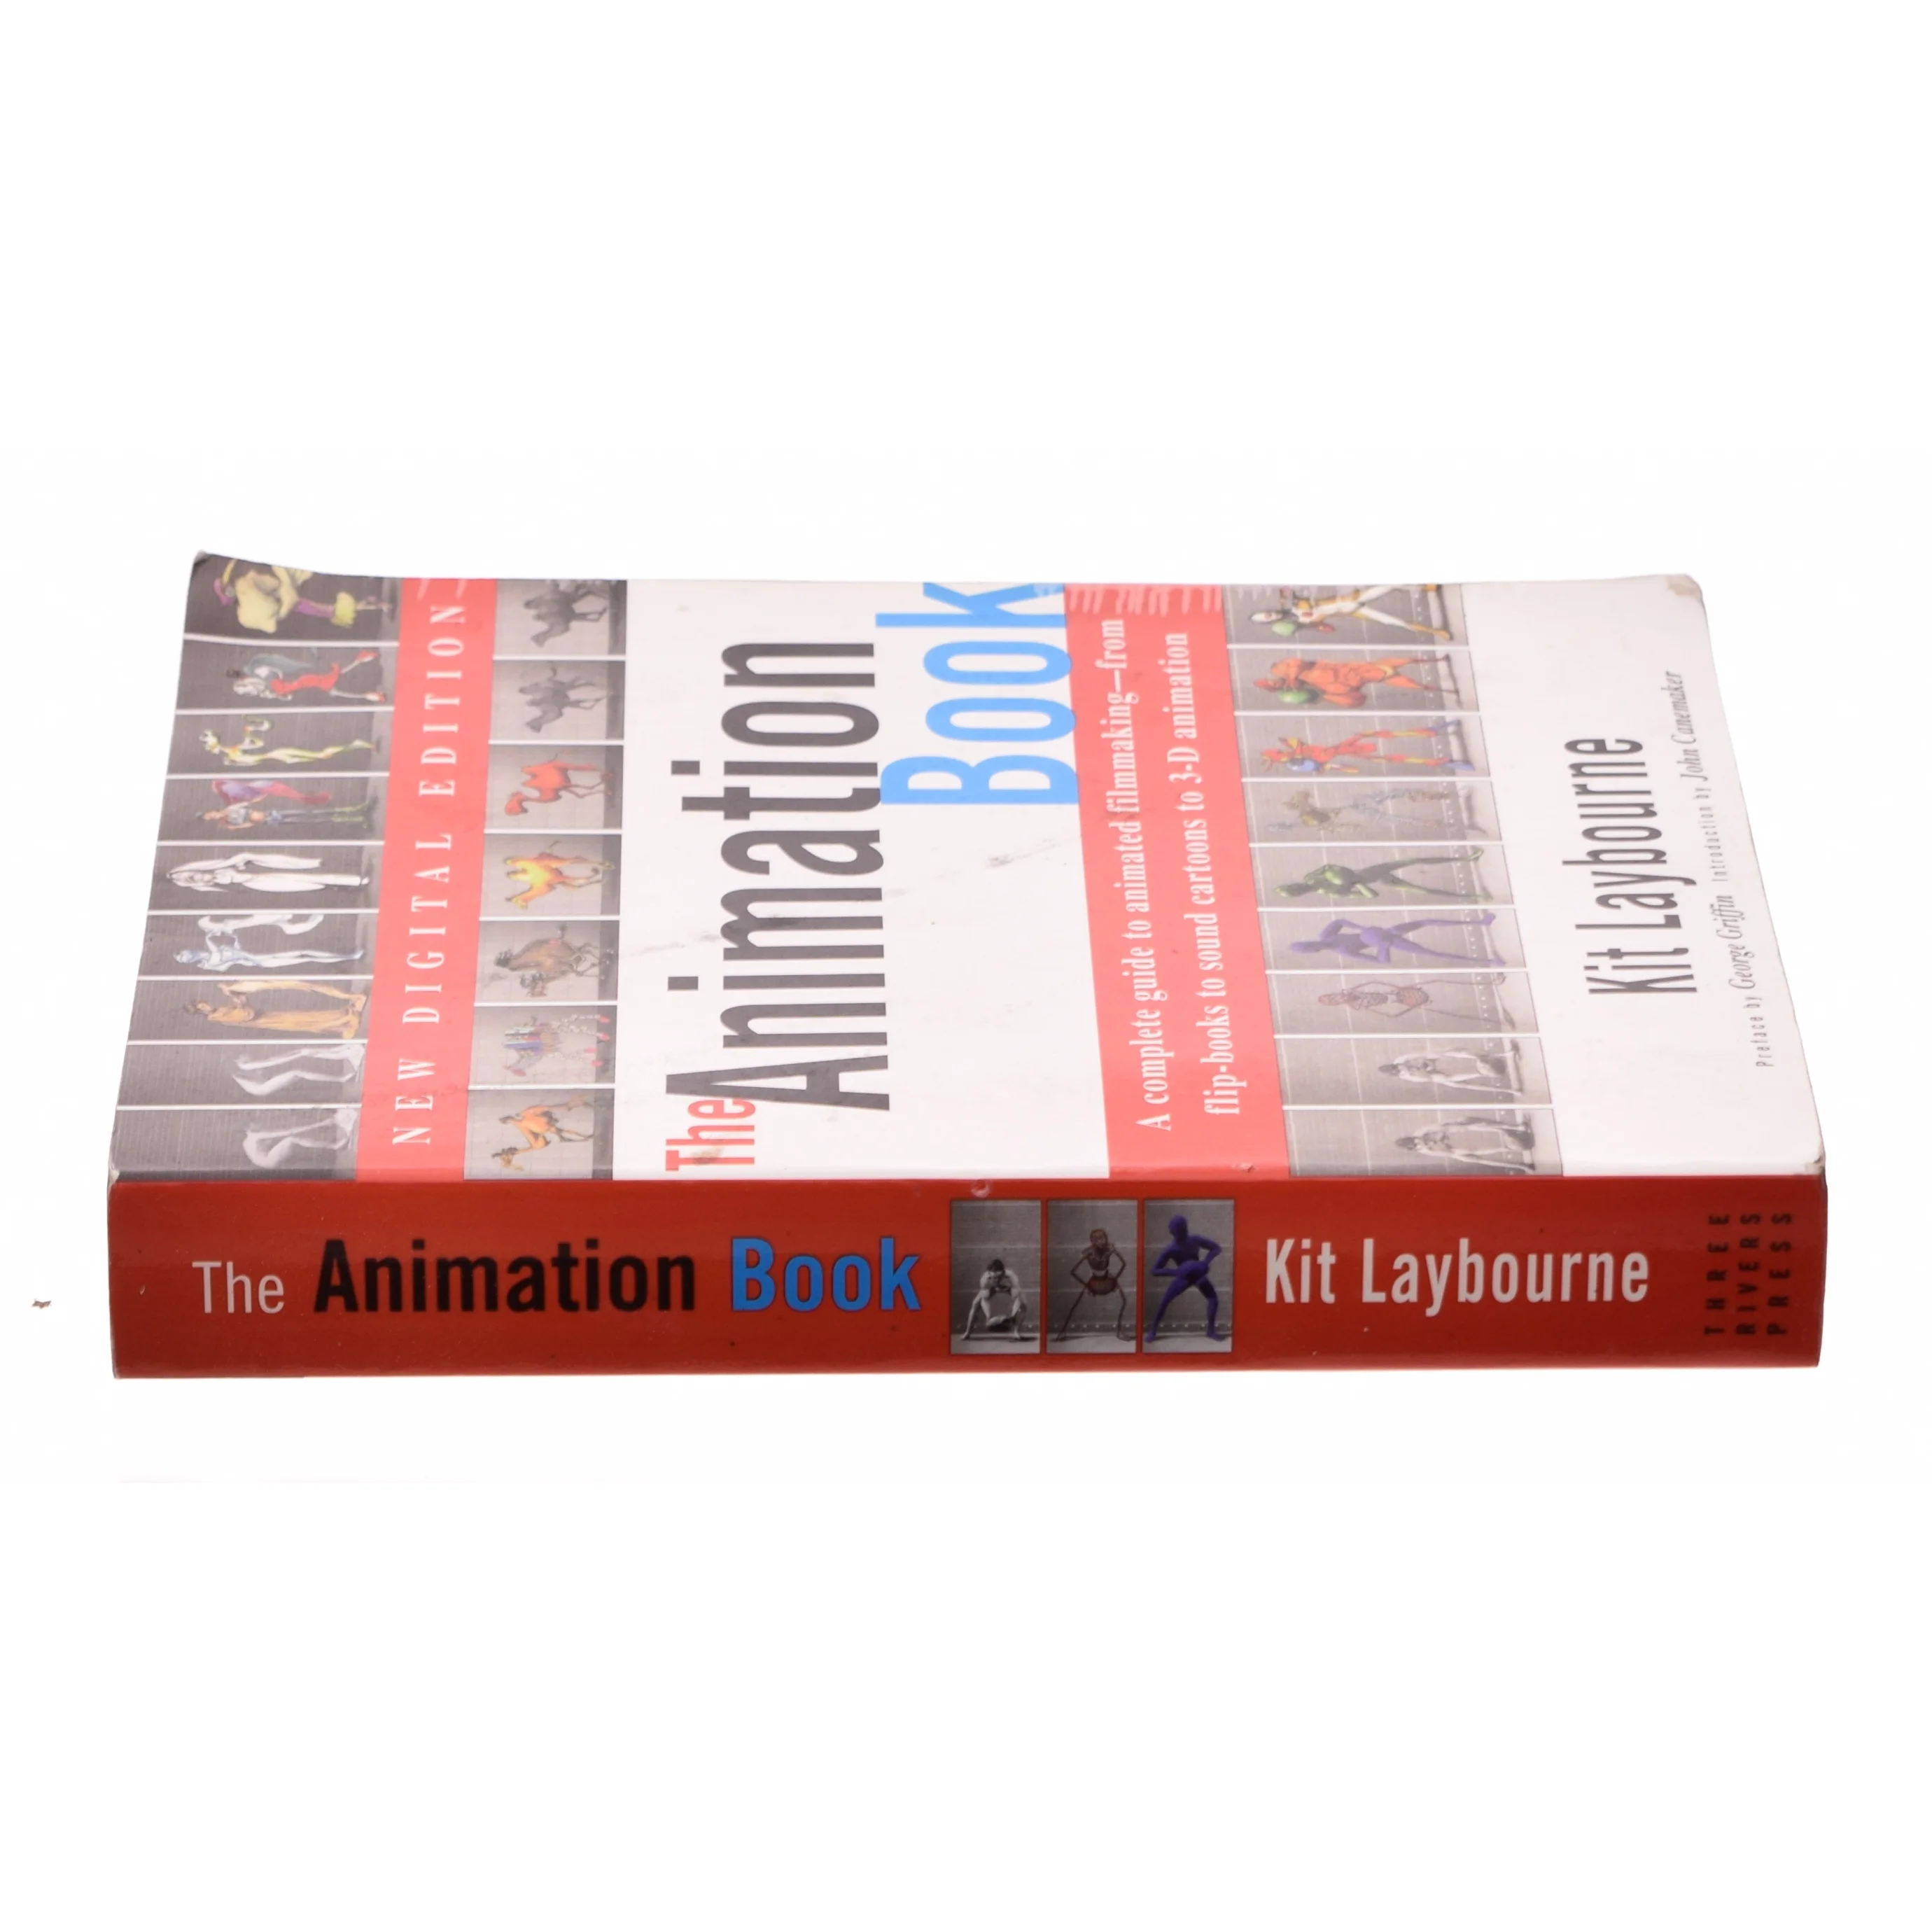 The Animation Book (A Complete Guide to